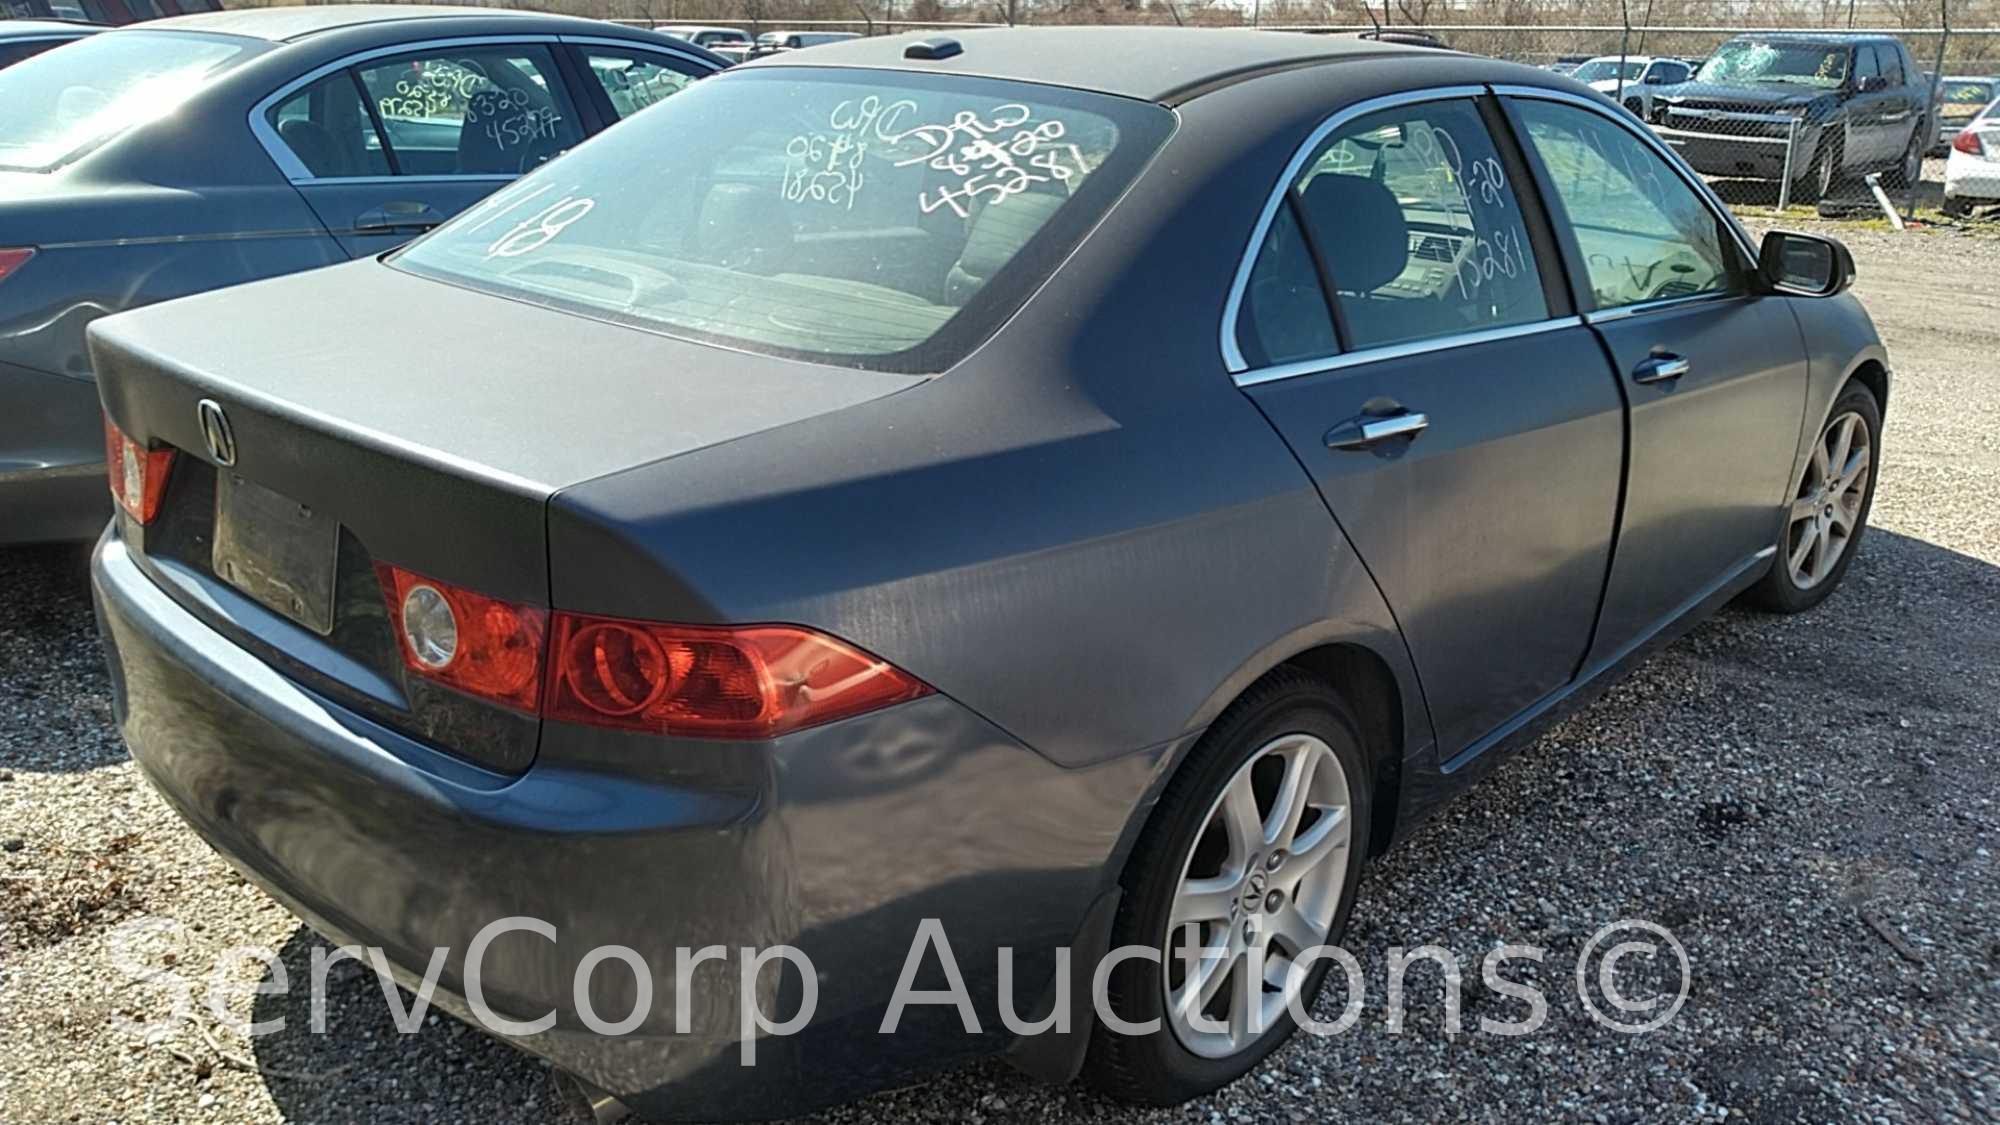 2005 Acura TSX Passenger Car, VIN # JH4CL96855C015586 Reconstructed